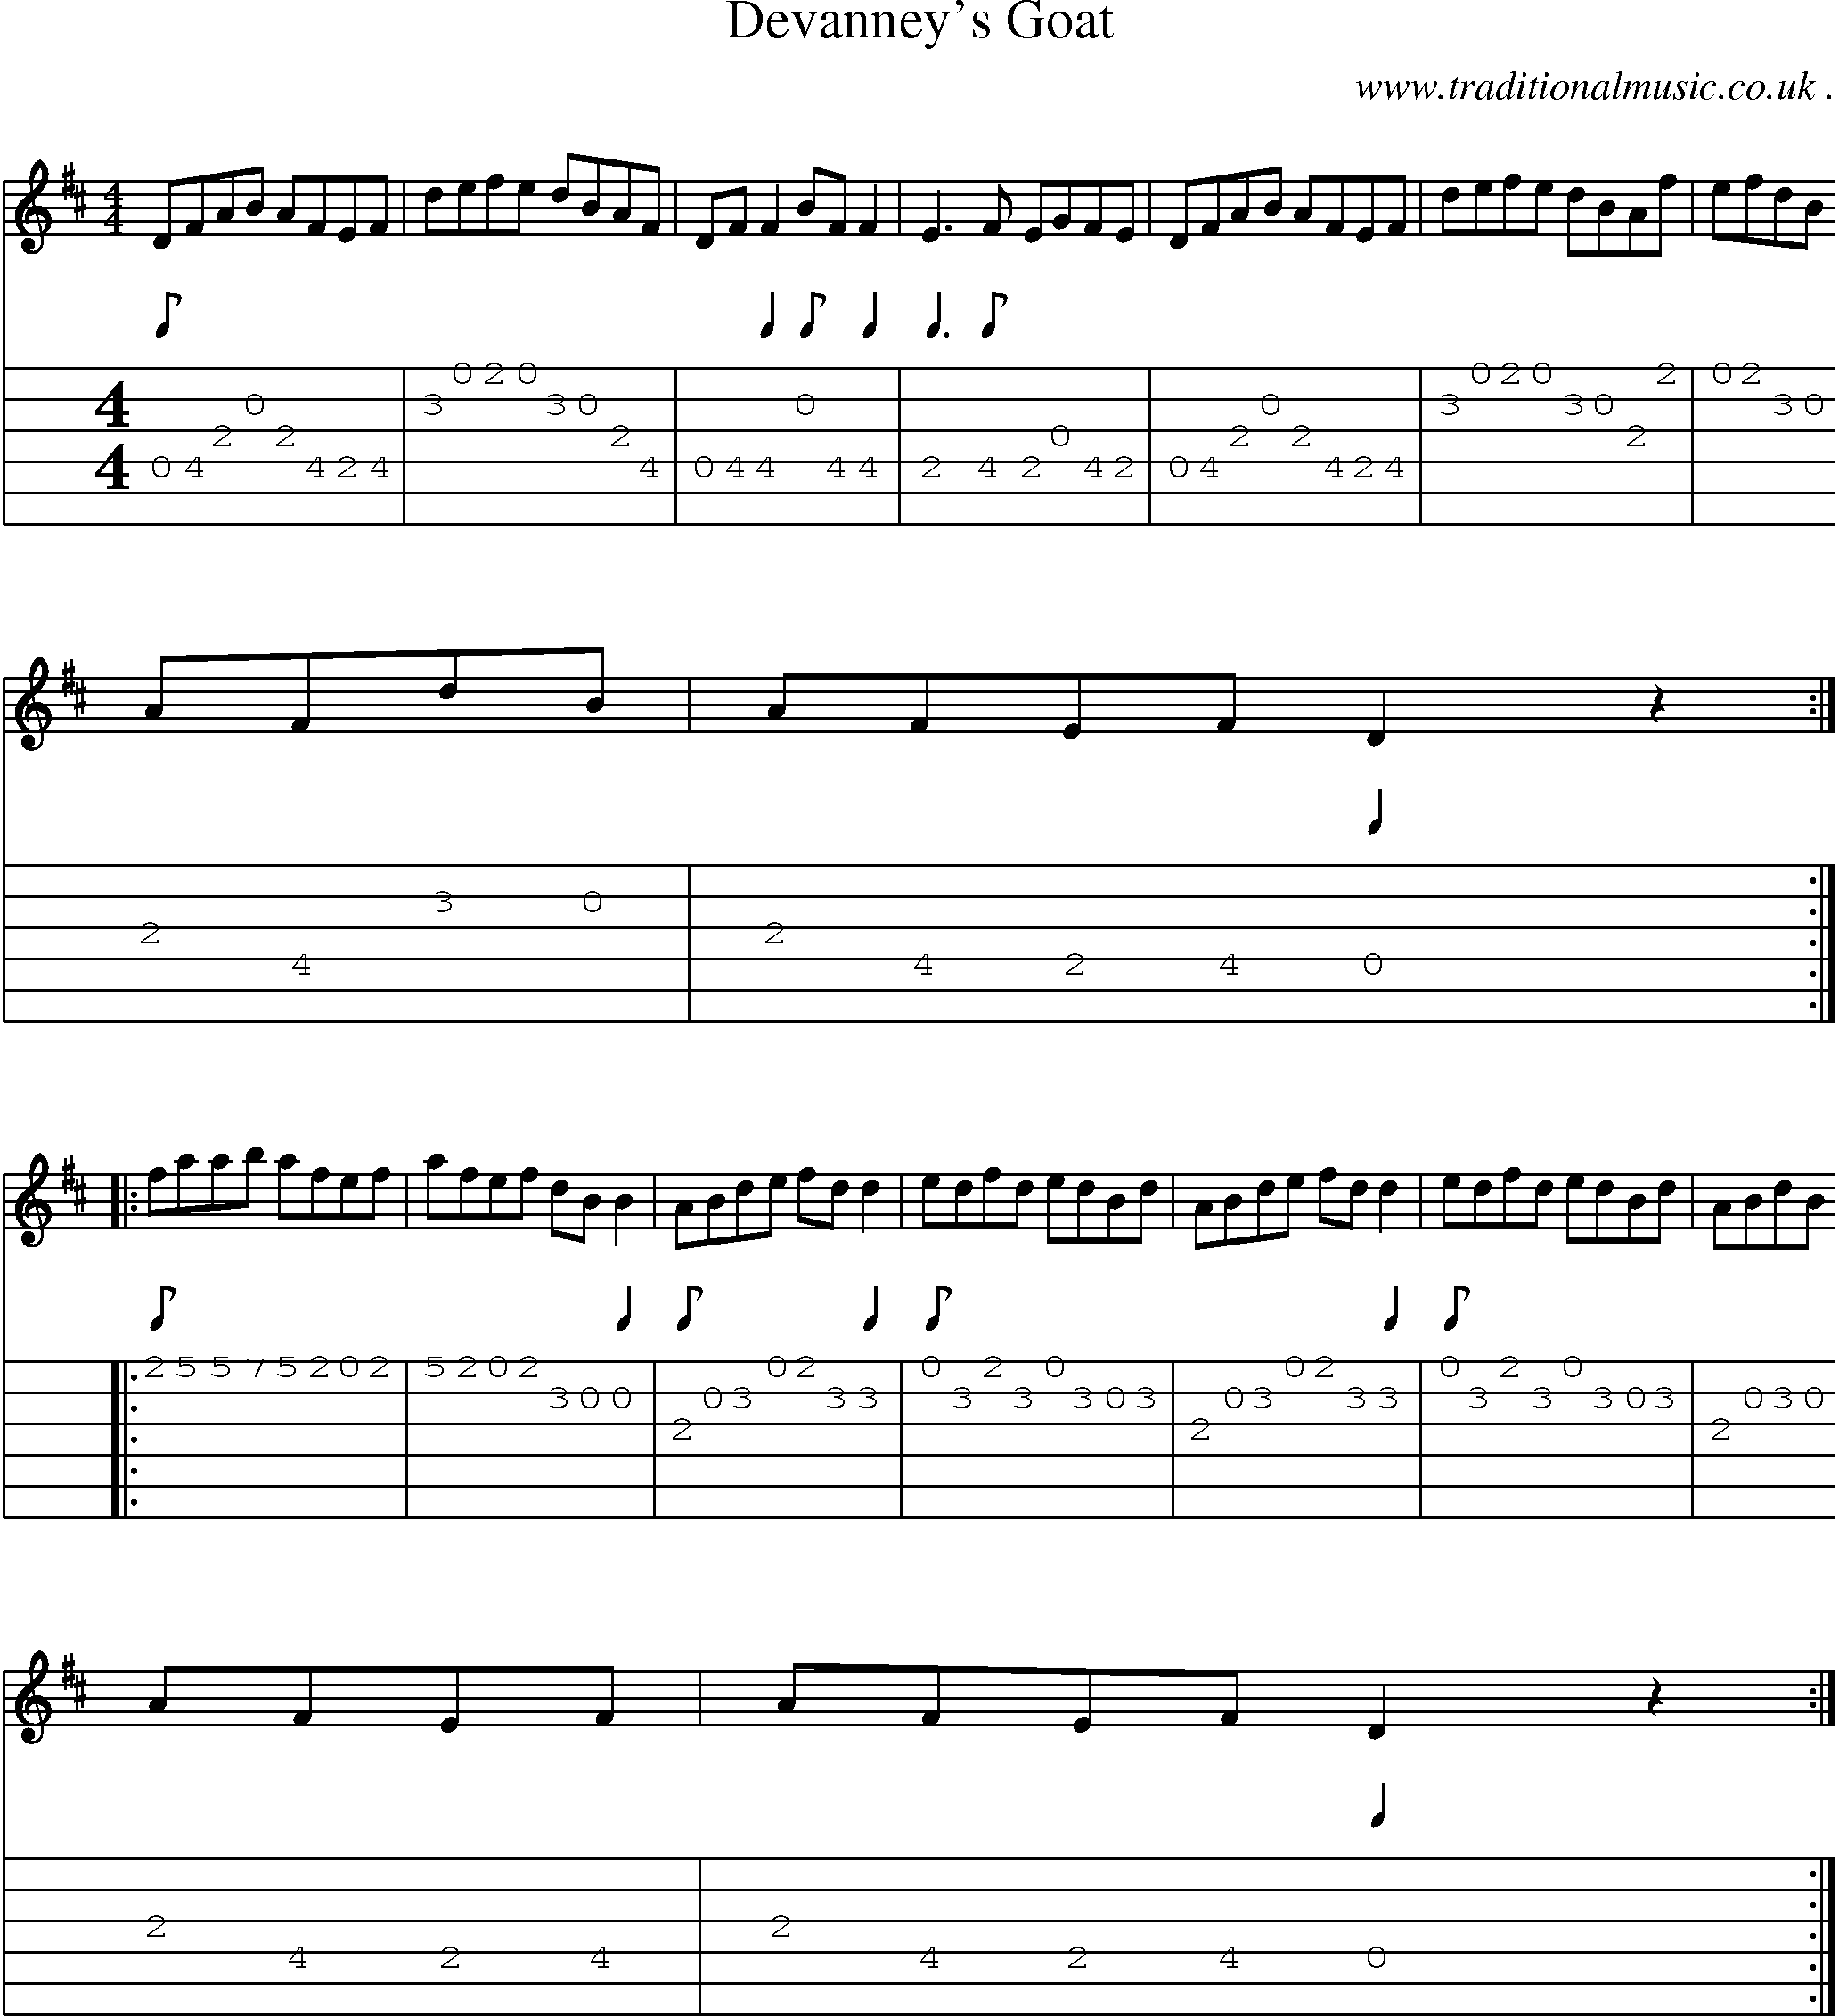 Sheet-Music and Guitar Tabs for Devanneys Goat